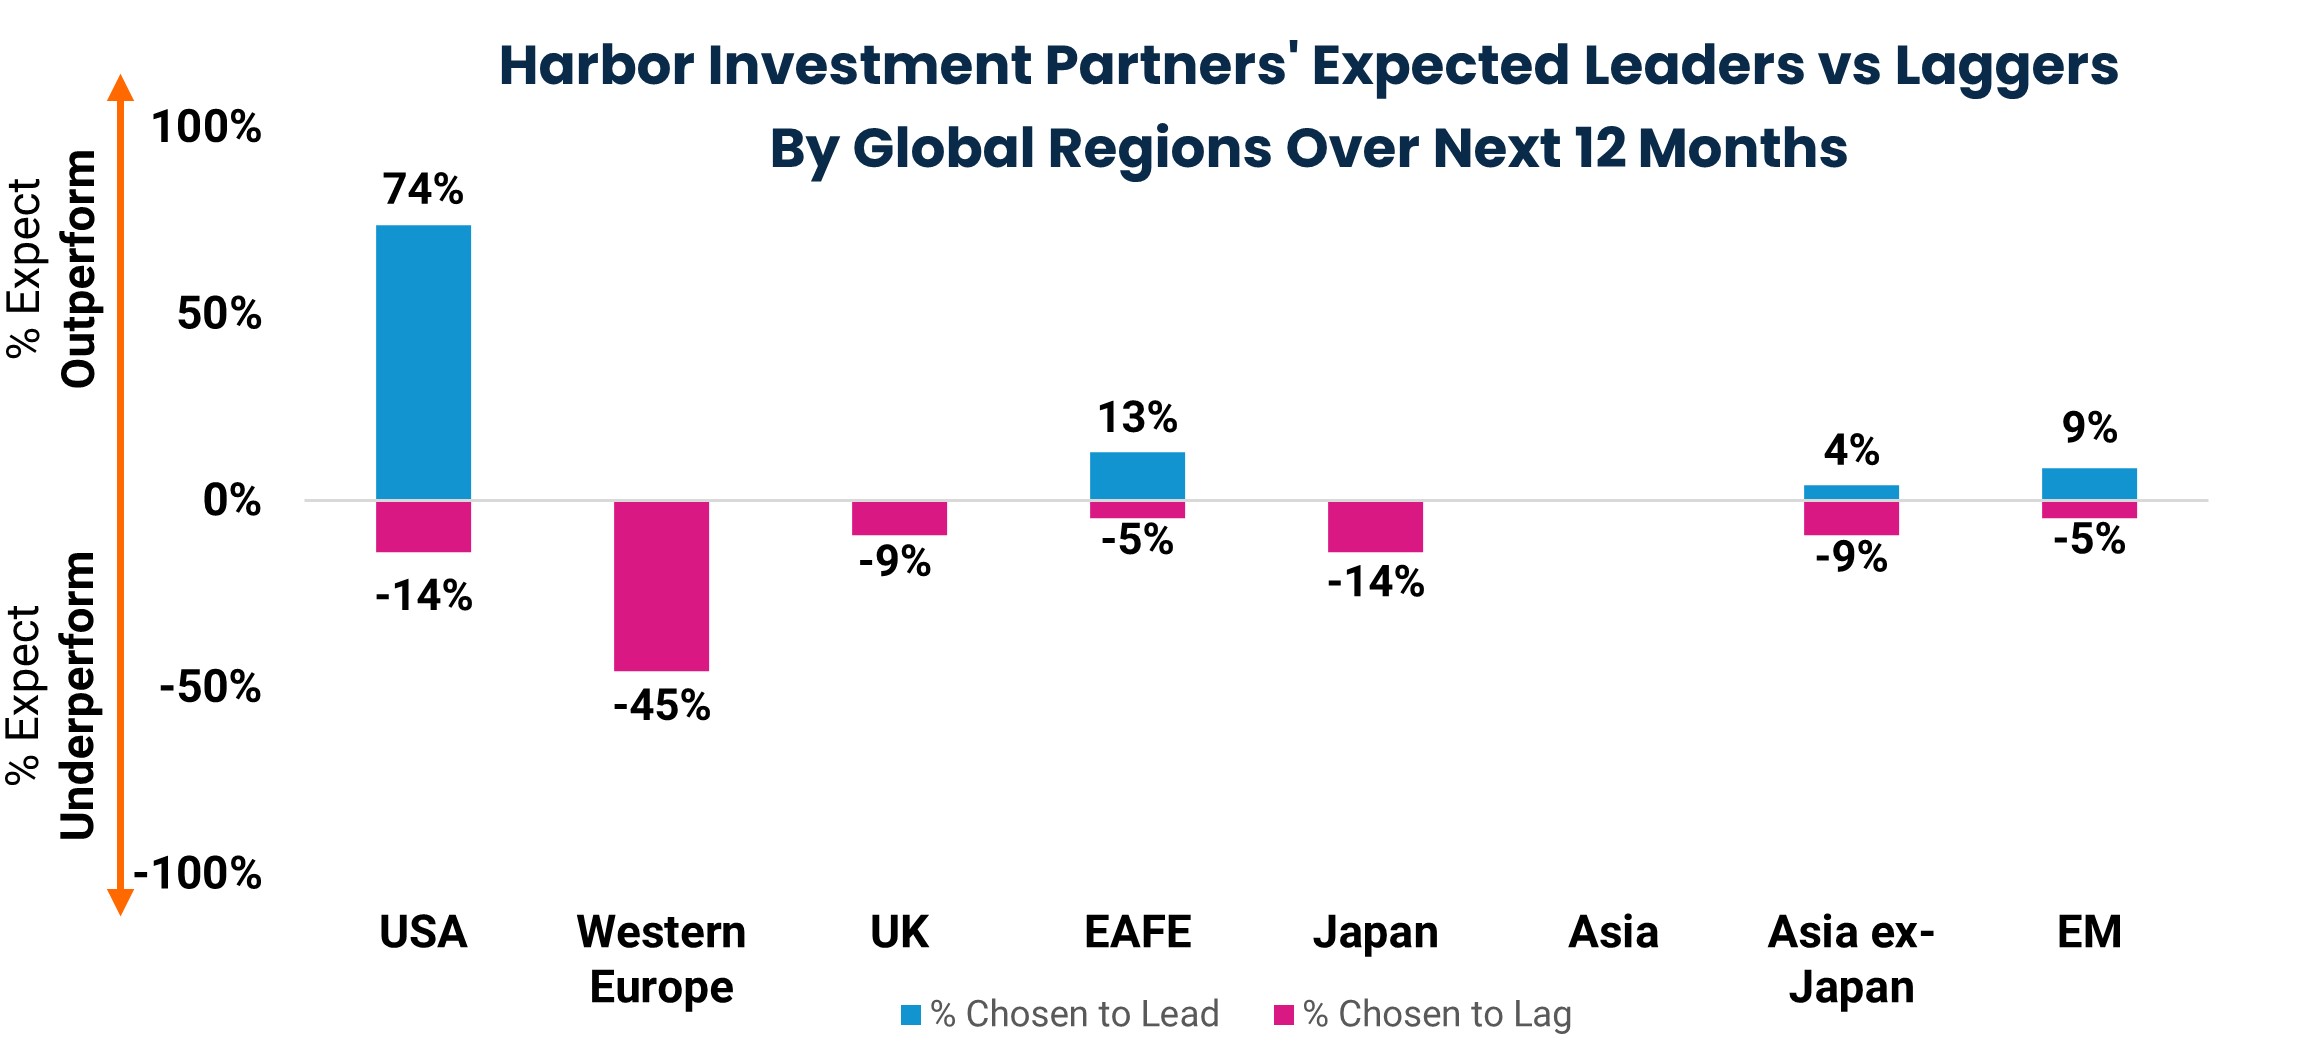 Harbor Investment Partners' Expected Leaders vs Laggers By Global Regions Over Next 12 Months